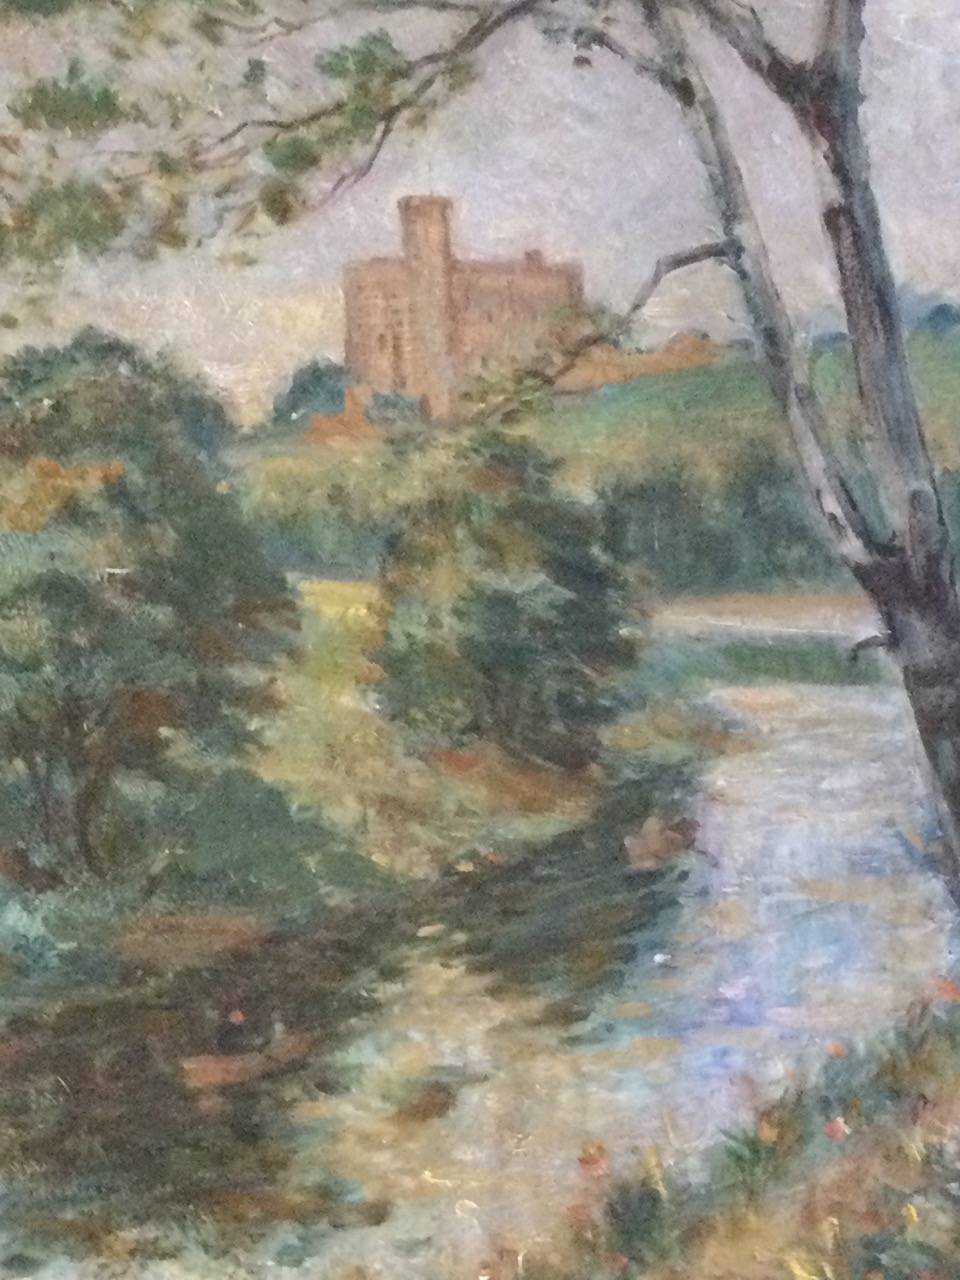 RH Pike, oil on board, river landscape with Warkworth castle, signed, Laing Gallery & Museum label - Image 2 of 3